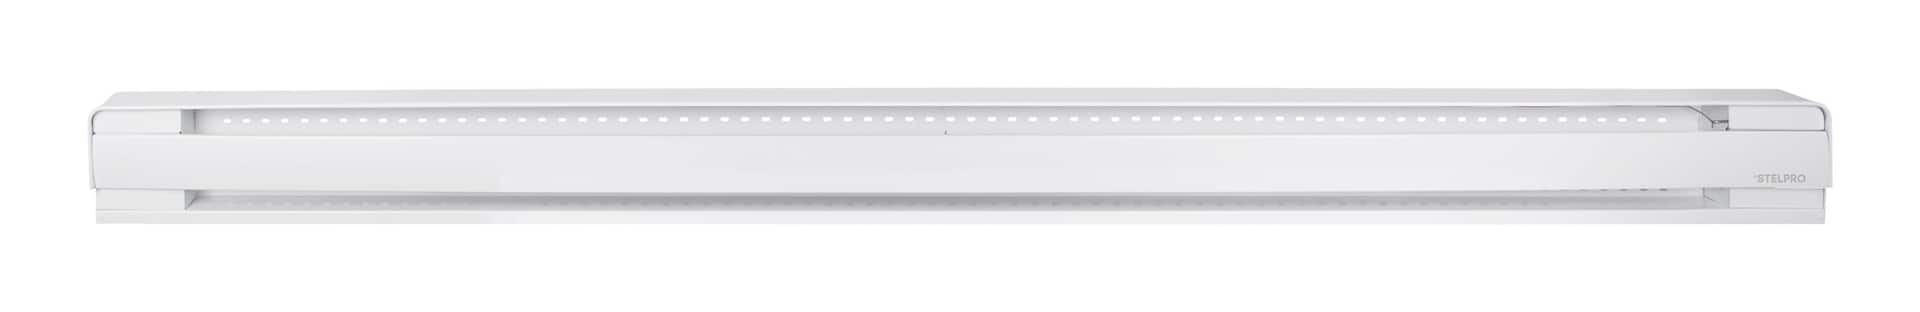 Stelpro Classic B Electric Baseboard Heater, 2000W, White | Canadian Tire